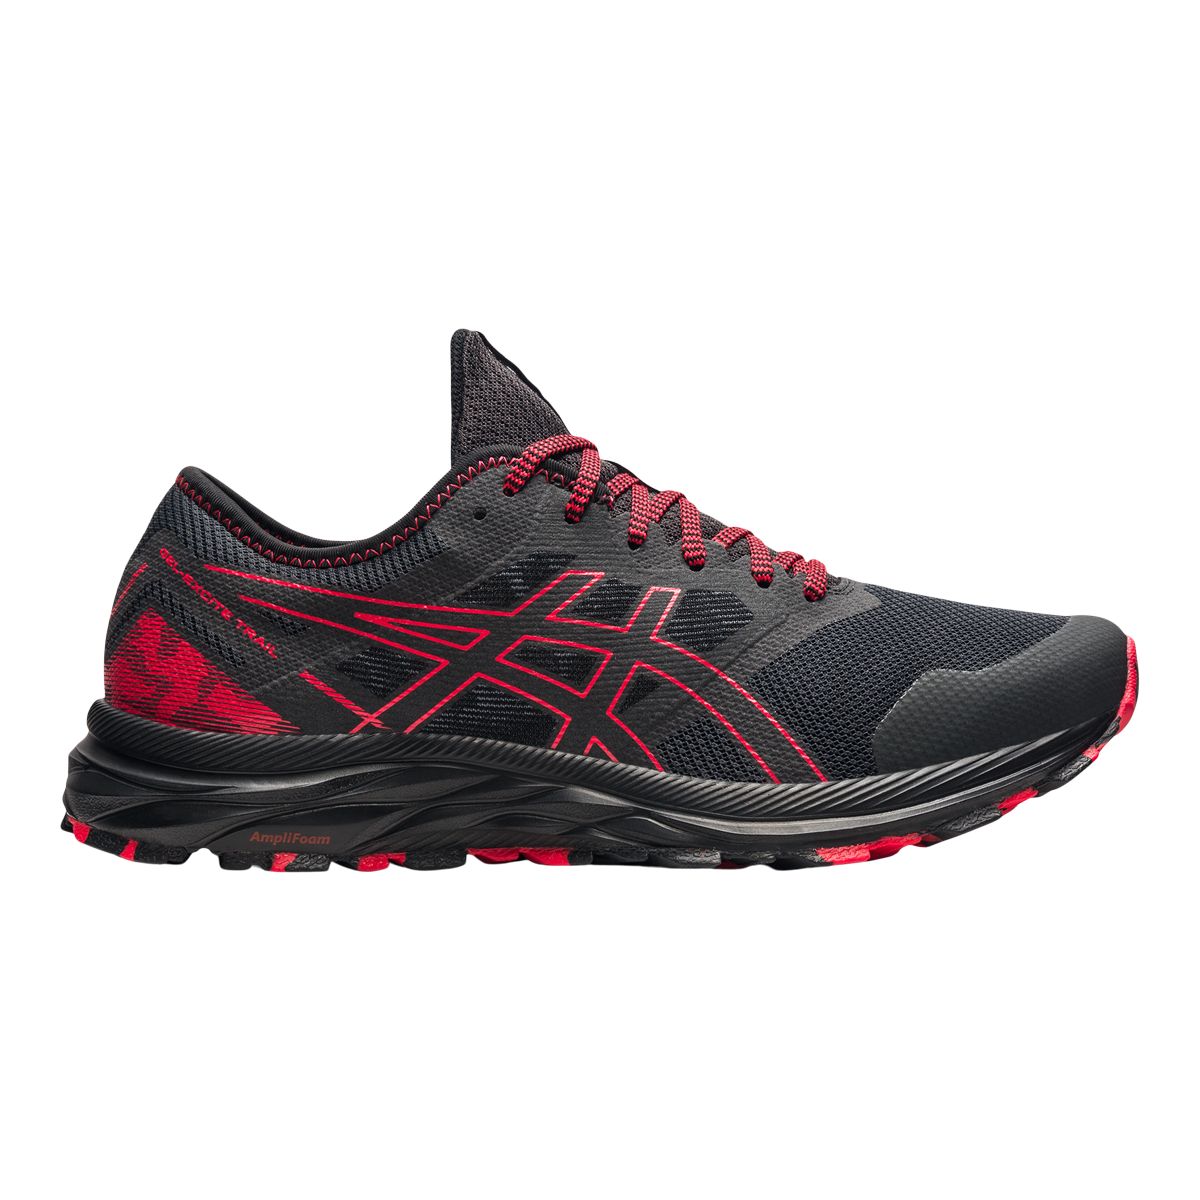 ASICS Men's Gel-Excite Trail Running Shoes, Low-Cut, Off Road, Mesh ...